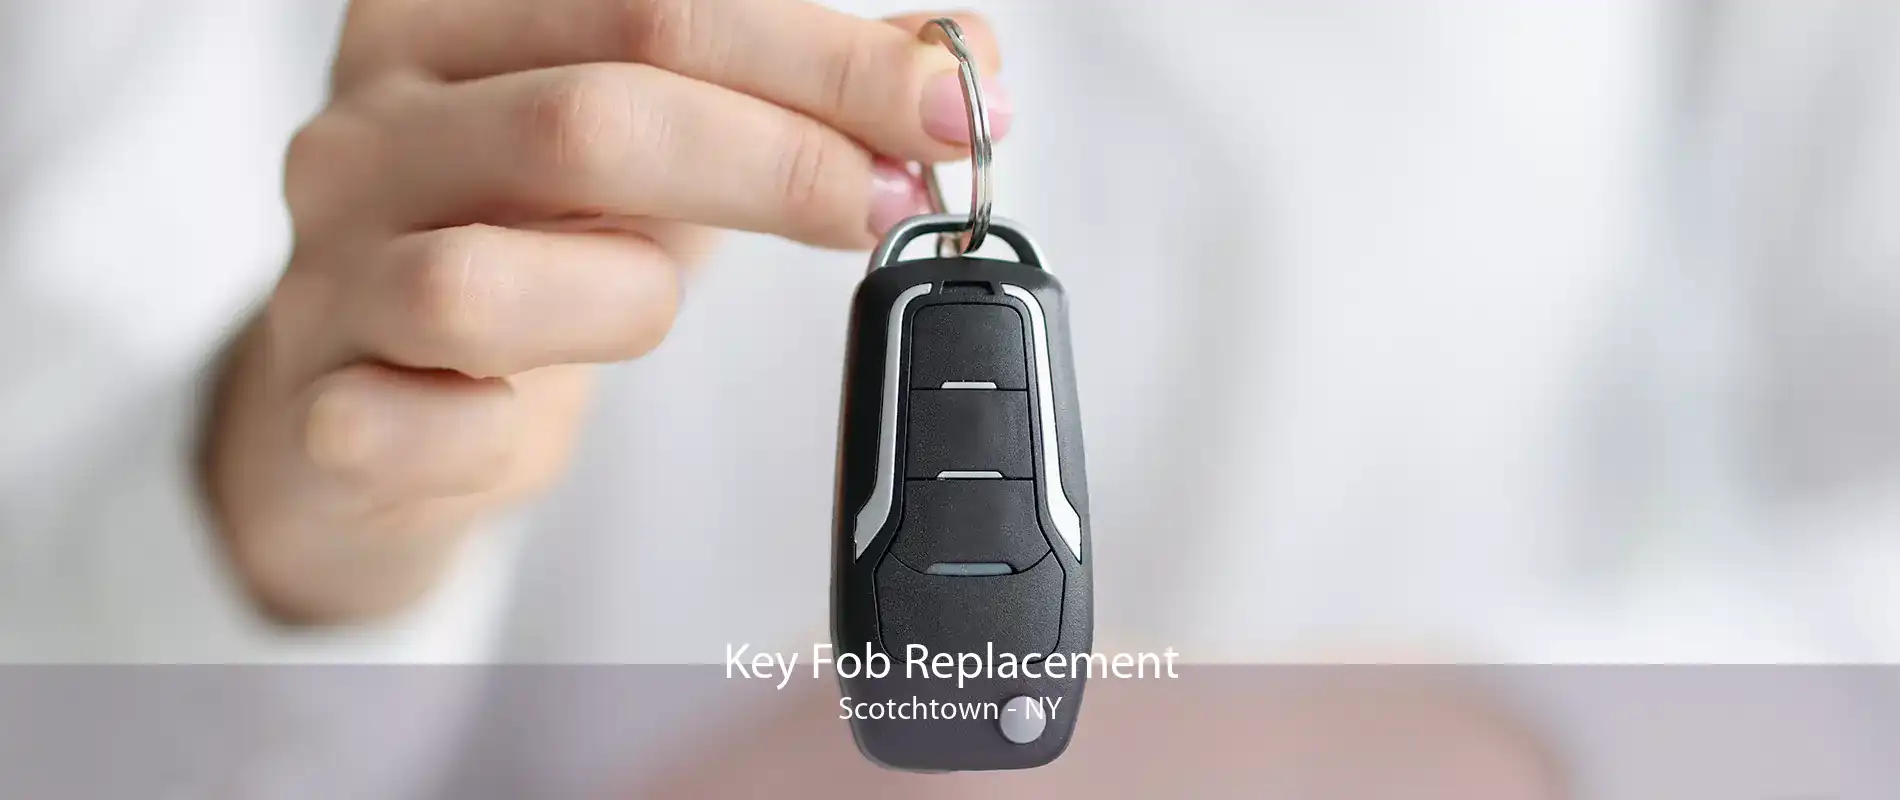 Key Fob Replacement Scotchtown - NY